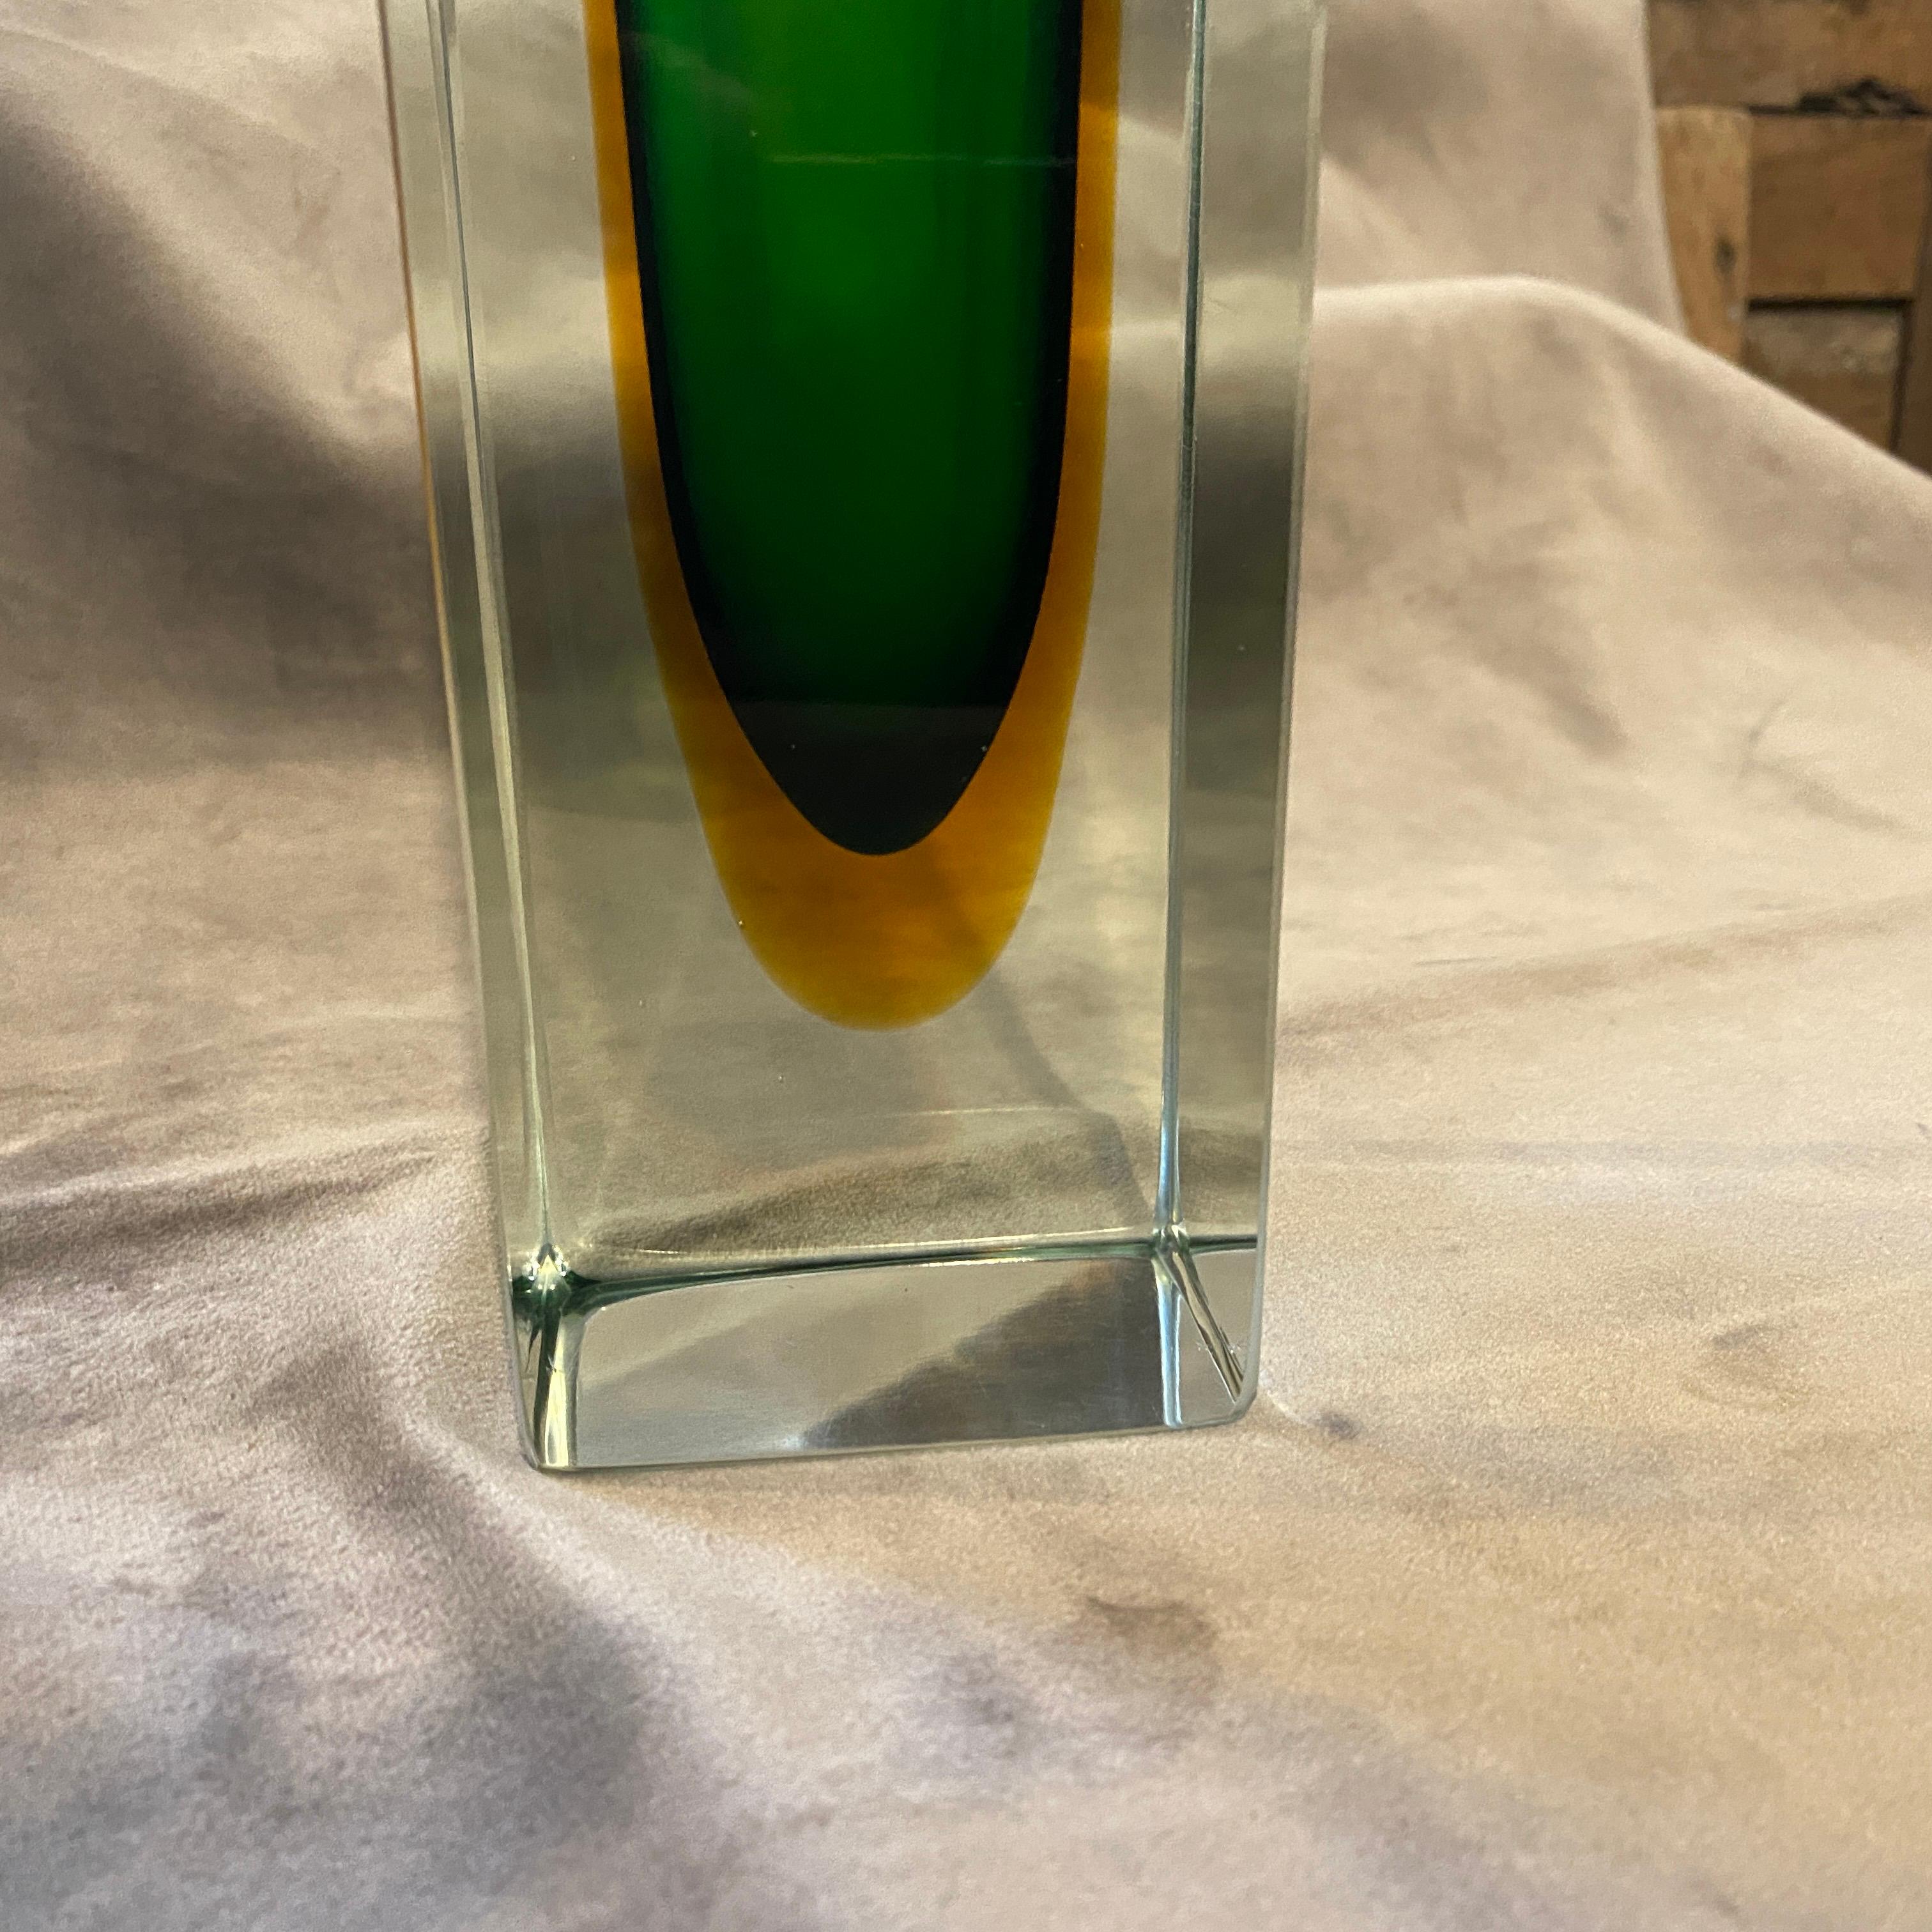 A modernist Murano glass vase made in the Seventies. Yellow and green sommerso glass it has no flaws